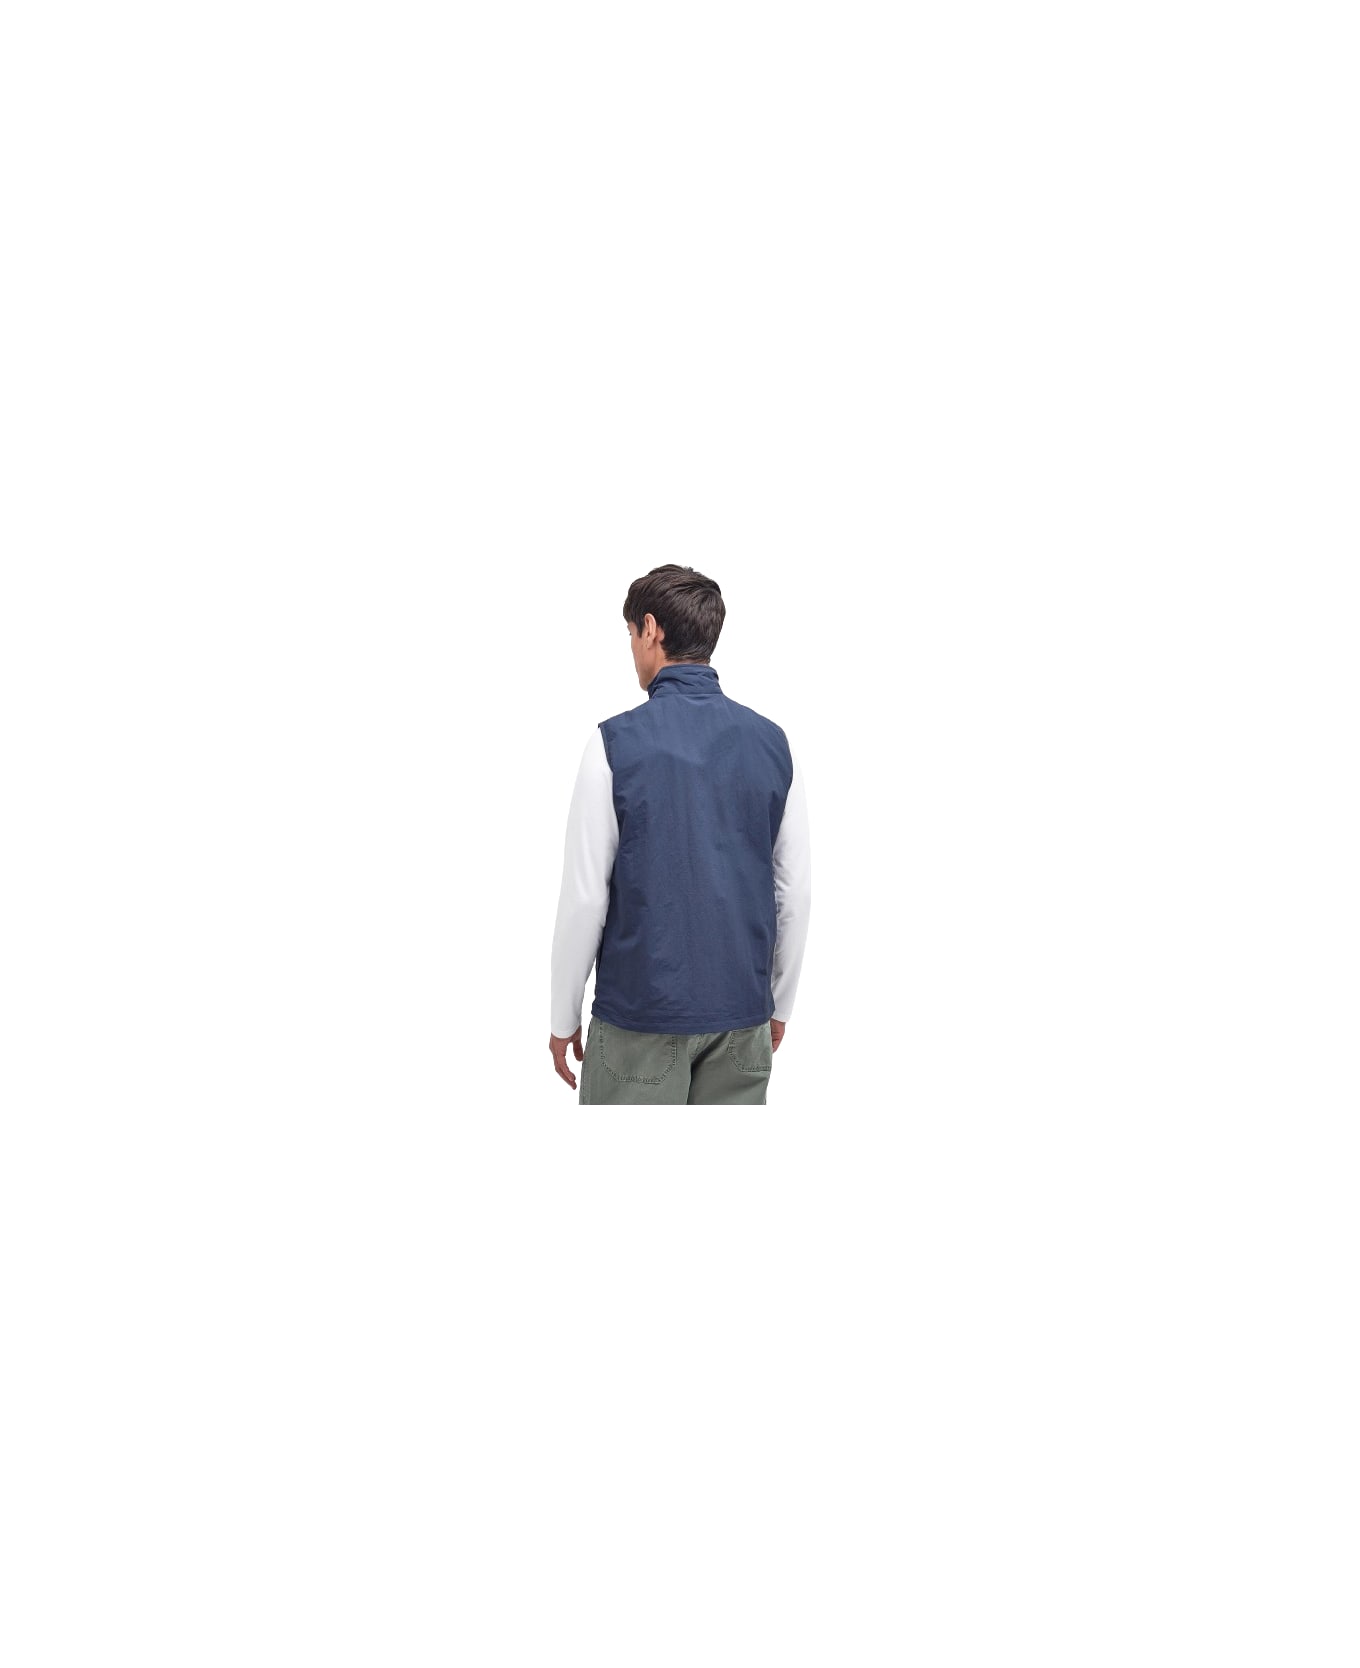 Barbour Utility Spey Gilet - Navy